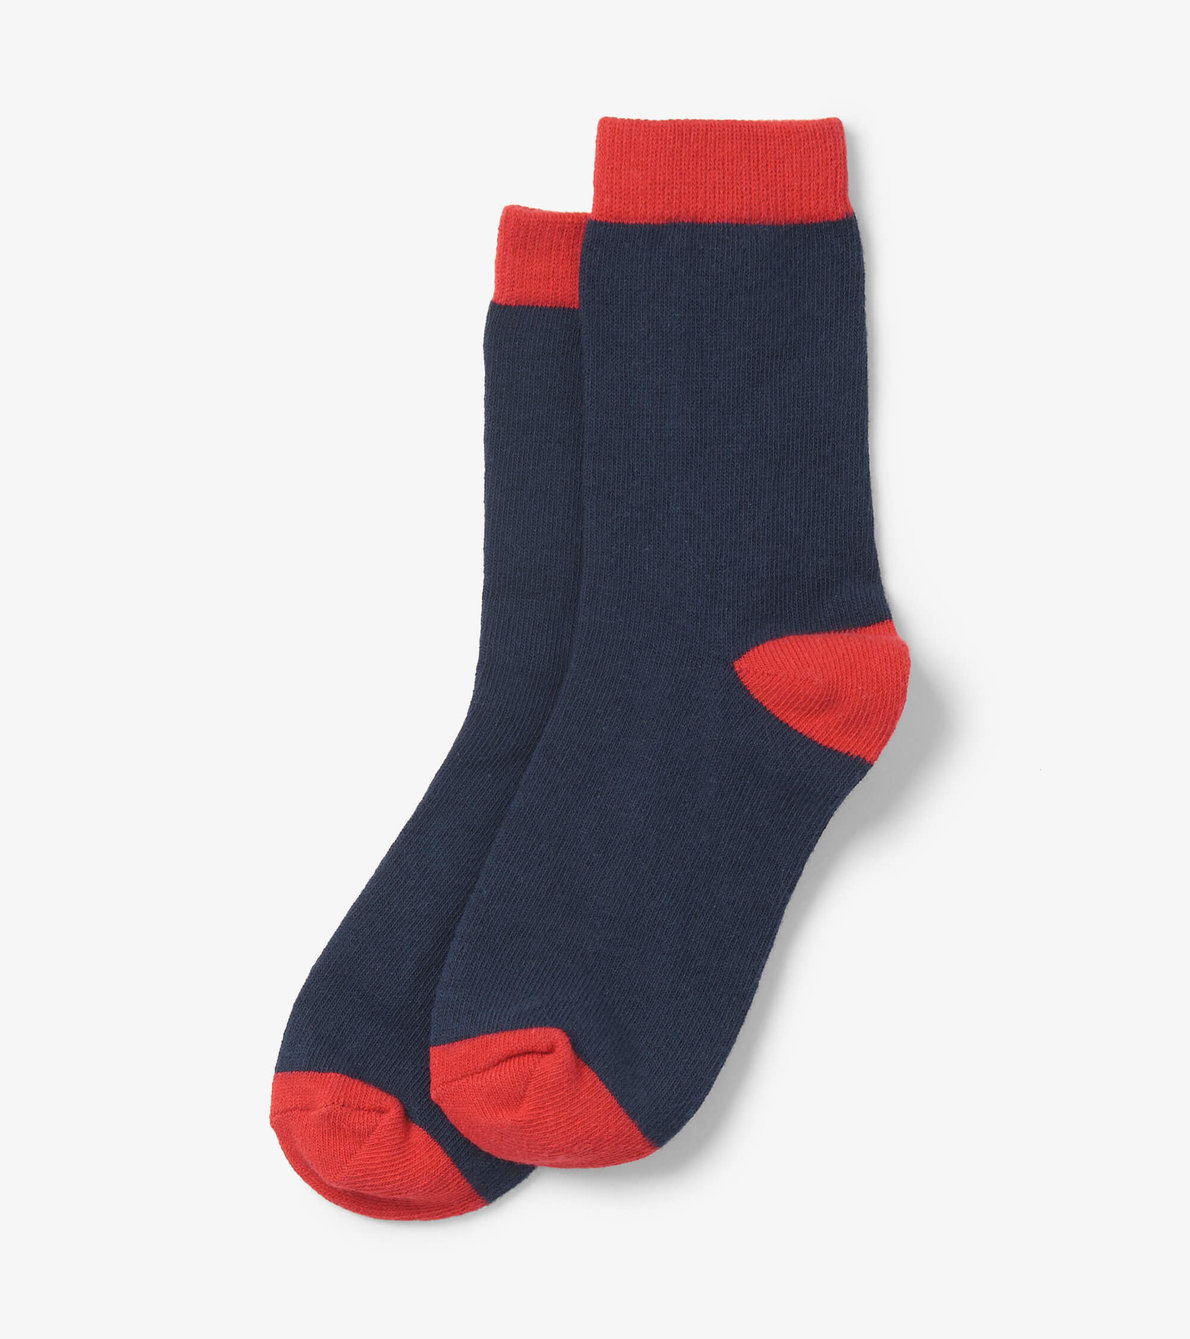 View larger image of Kids Navy & Red Crew Socks